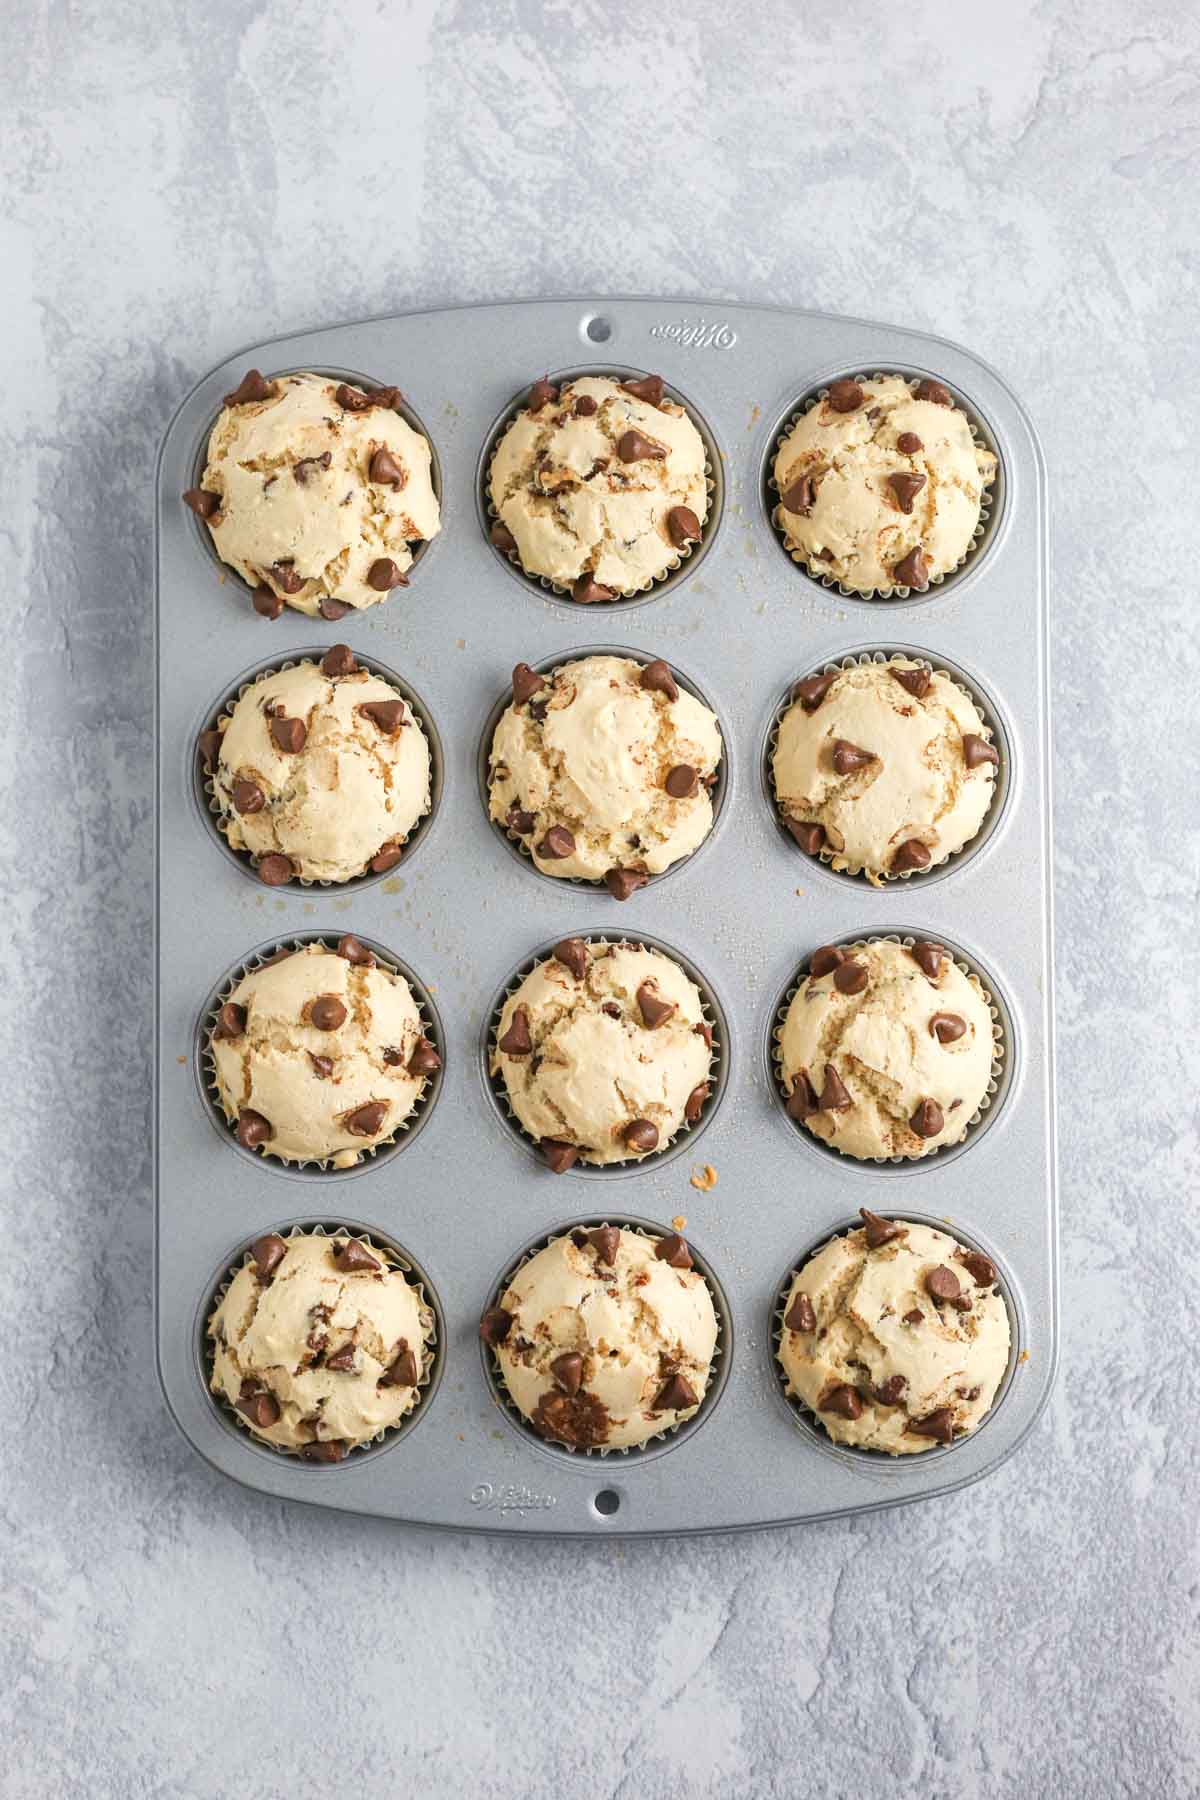 baked muffins risen in the muffin tin with golden brown tops.